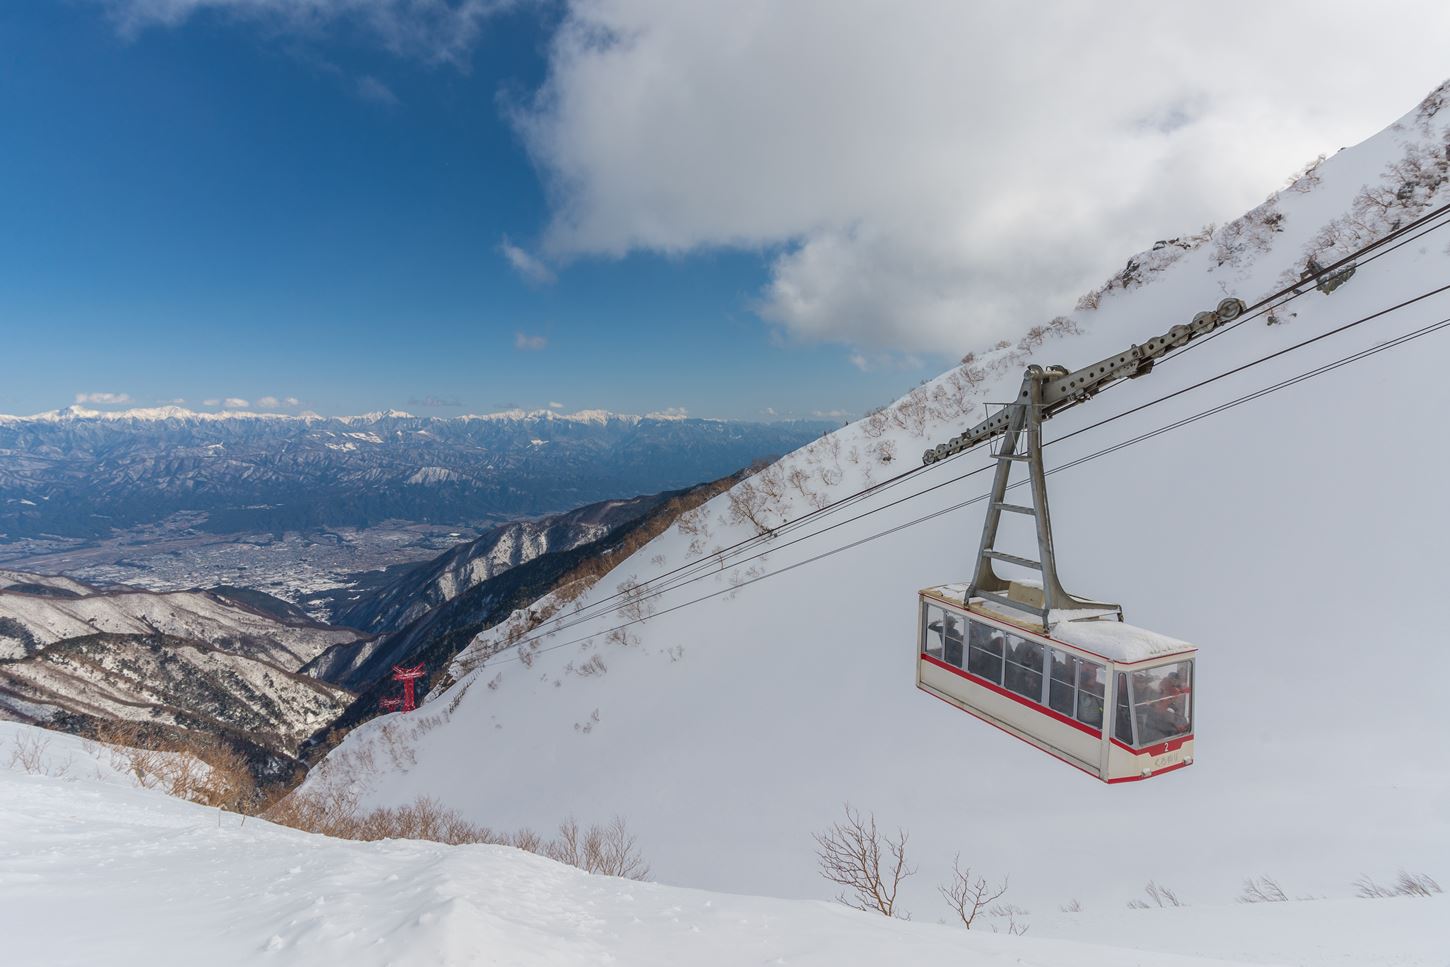 Sightseeing scenery that simply shows the weather in Nagano in March7